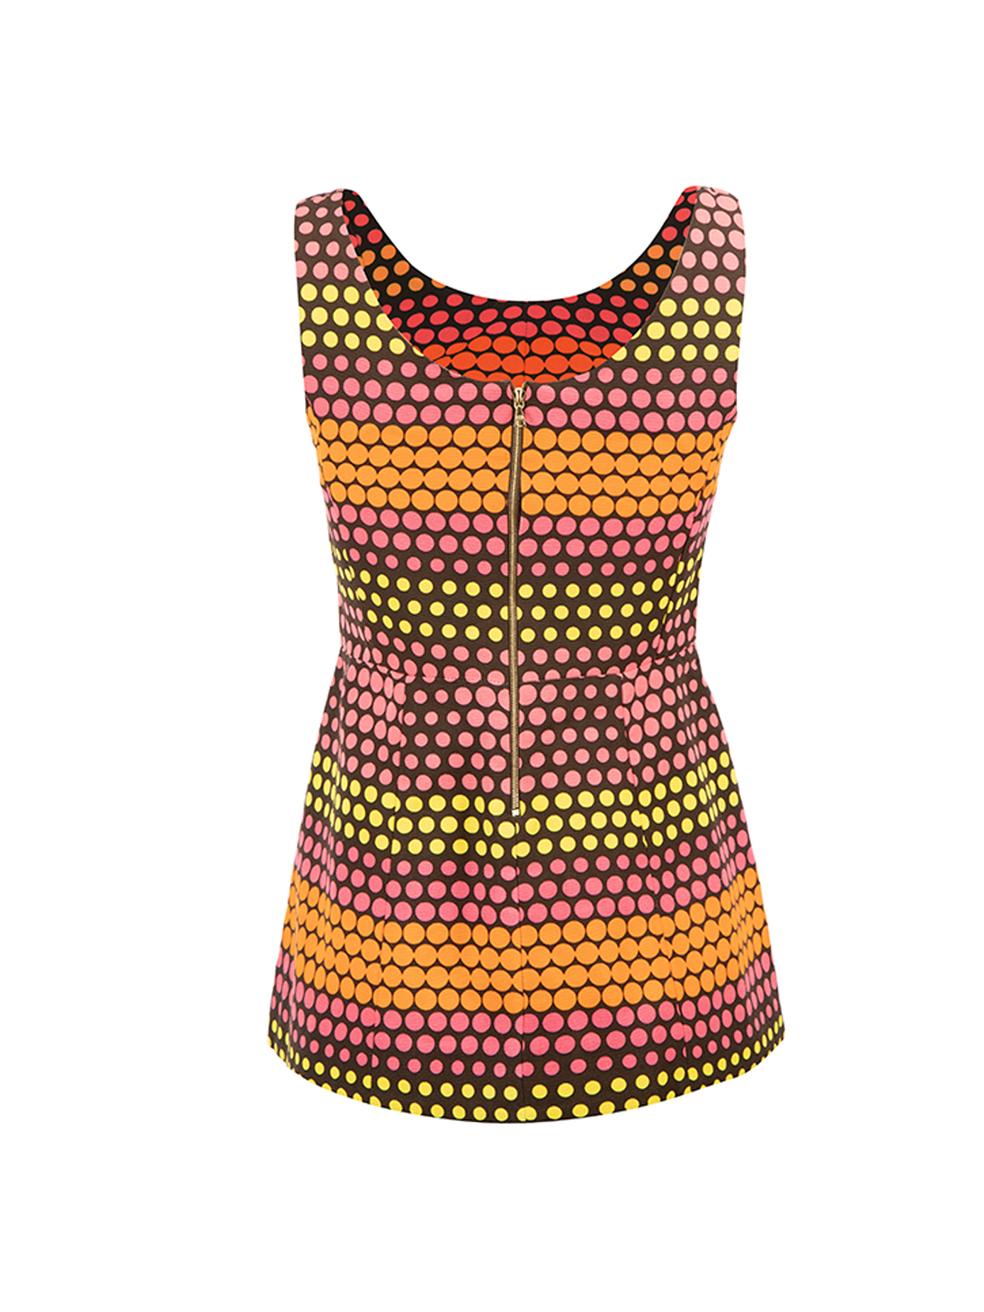 Polkadot Printed Sleeveless Peplum Top Size S In Good Condition For Sale In London, GB